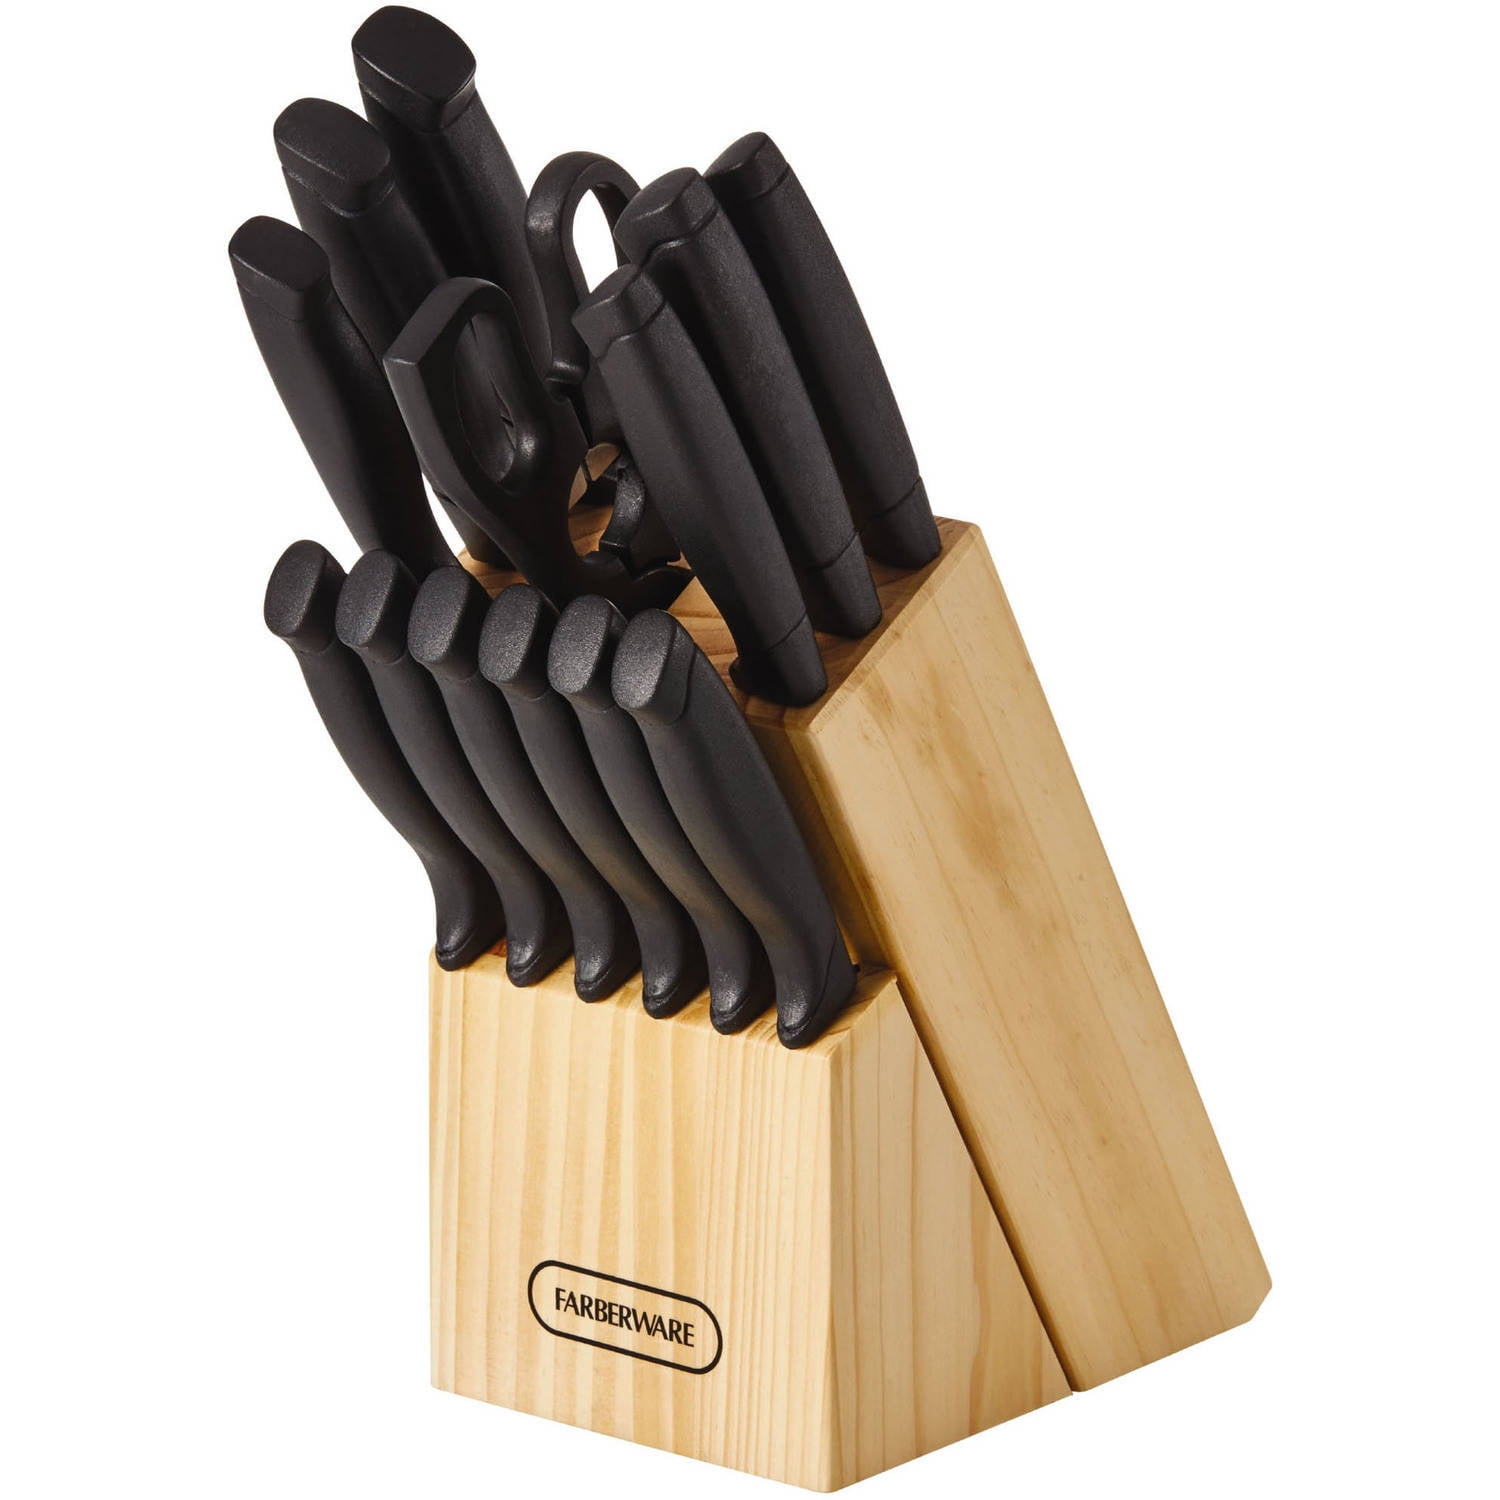 ROGERS PRO-CUT 3 piece KNIFE SET KNIVES * NEVER NEEDS SHARPENED